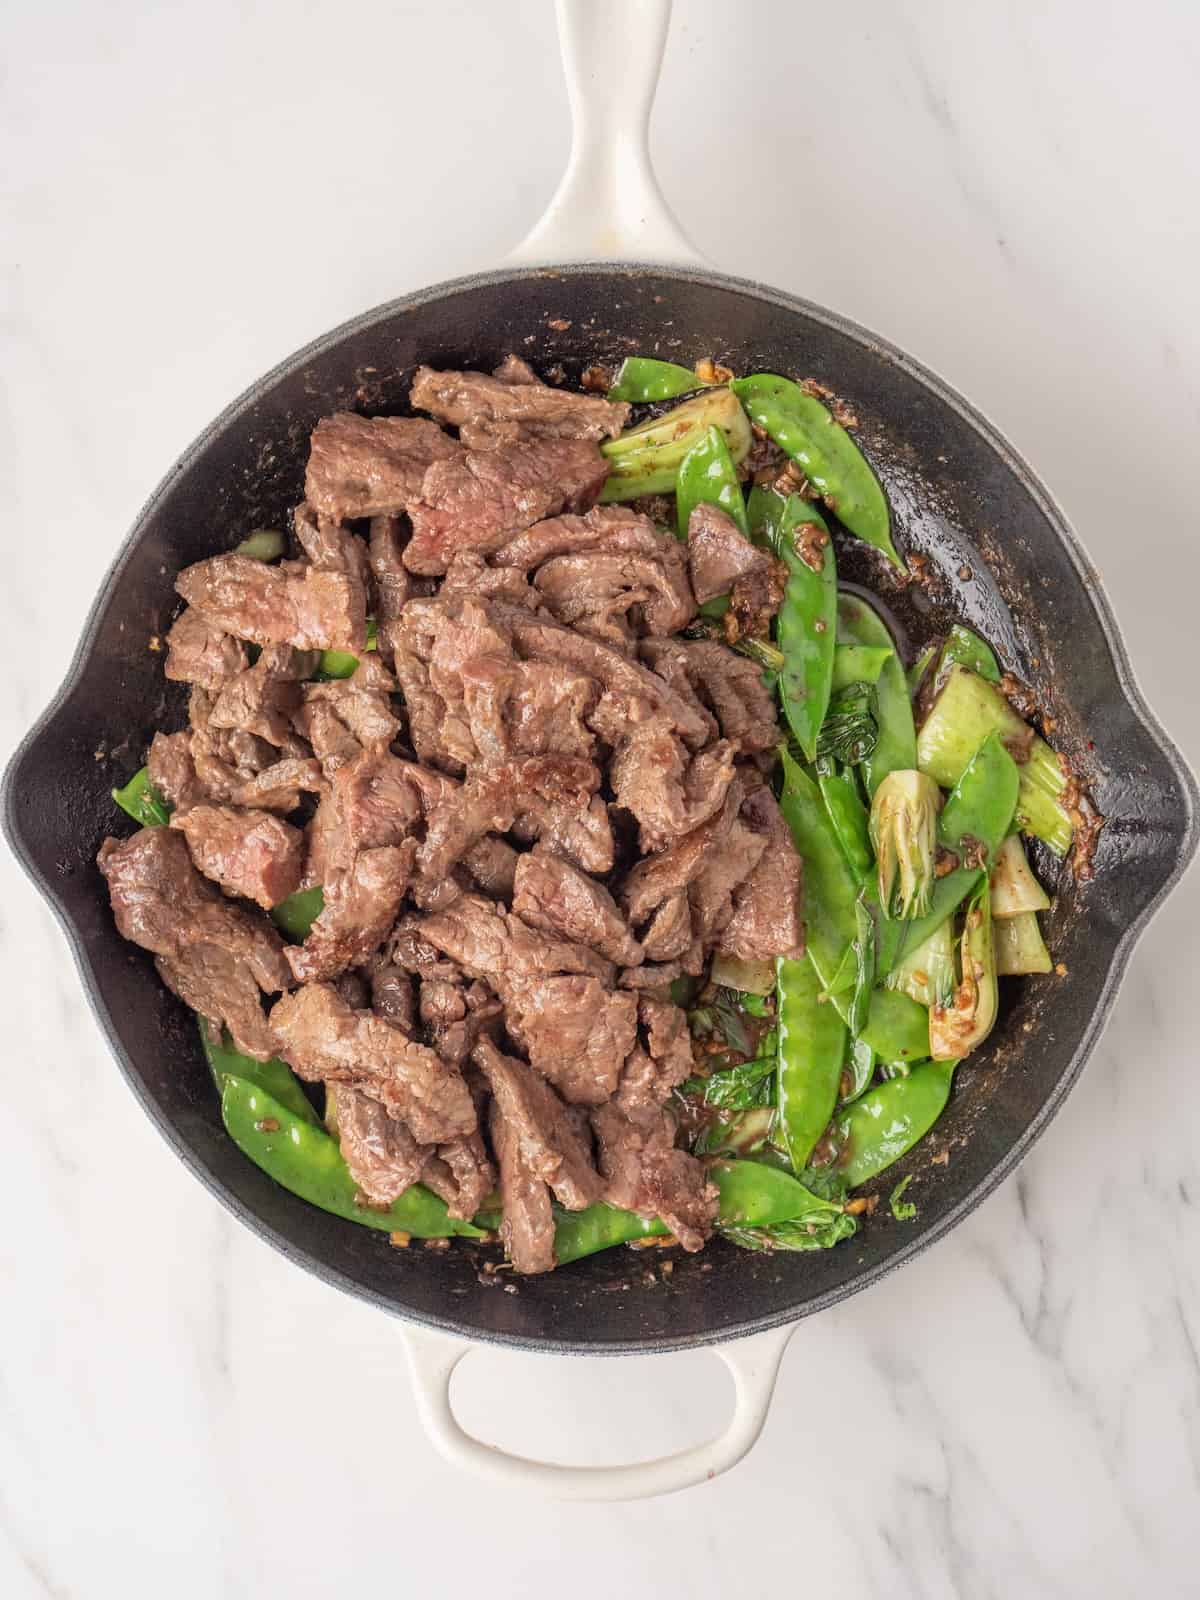 A large skillet with steak stir fry, the steak strips just added on one side and the veggies in the other half.